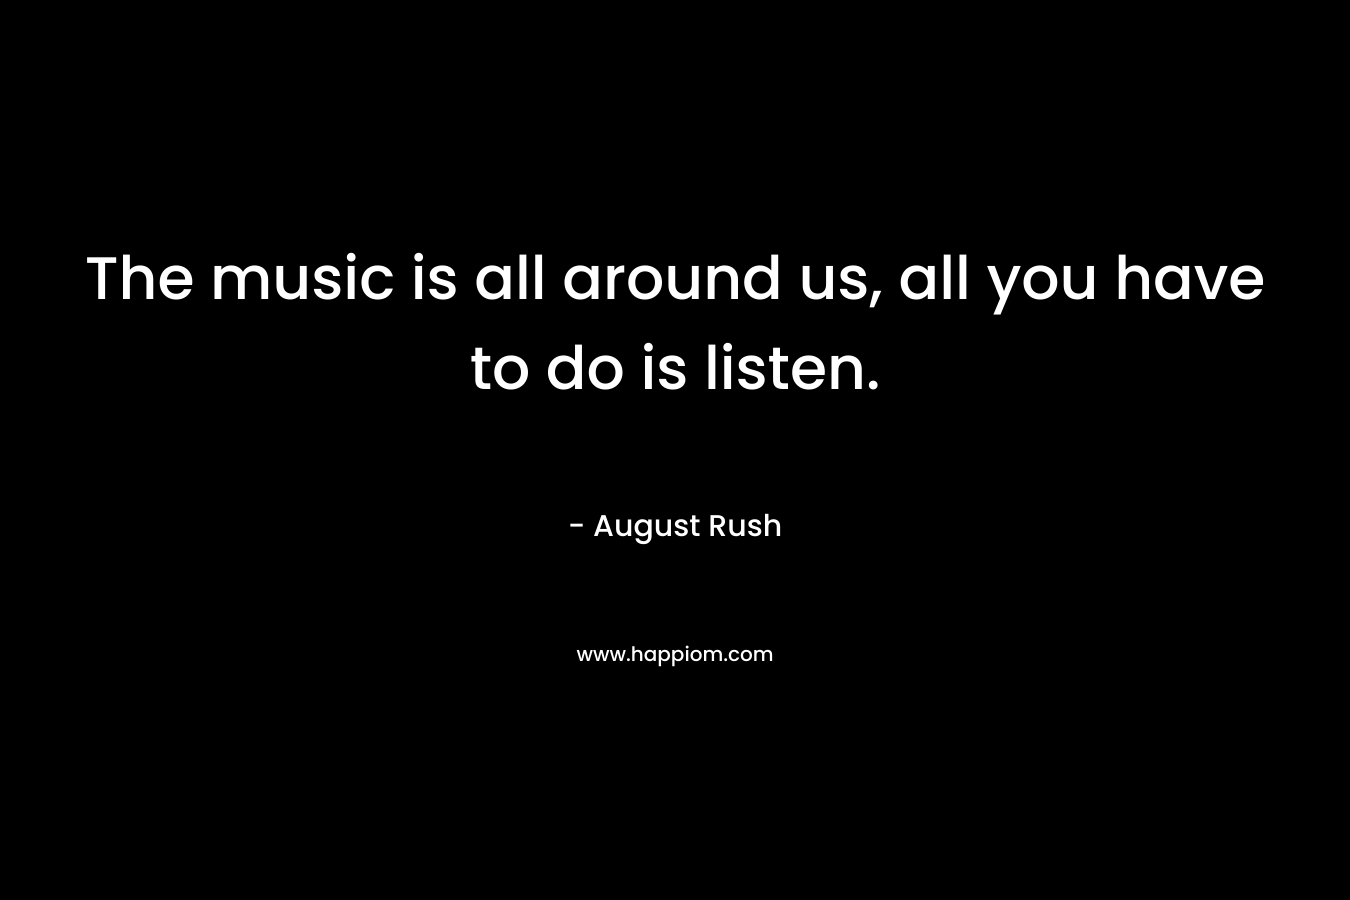 The music is all around us, all you have to do is listen.